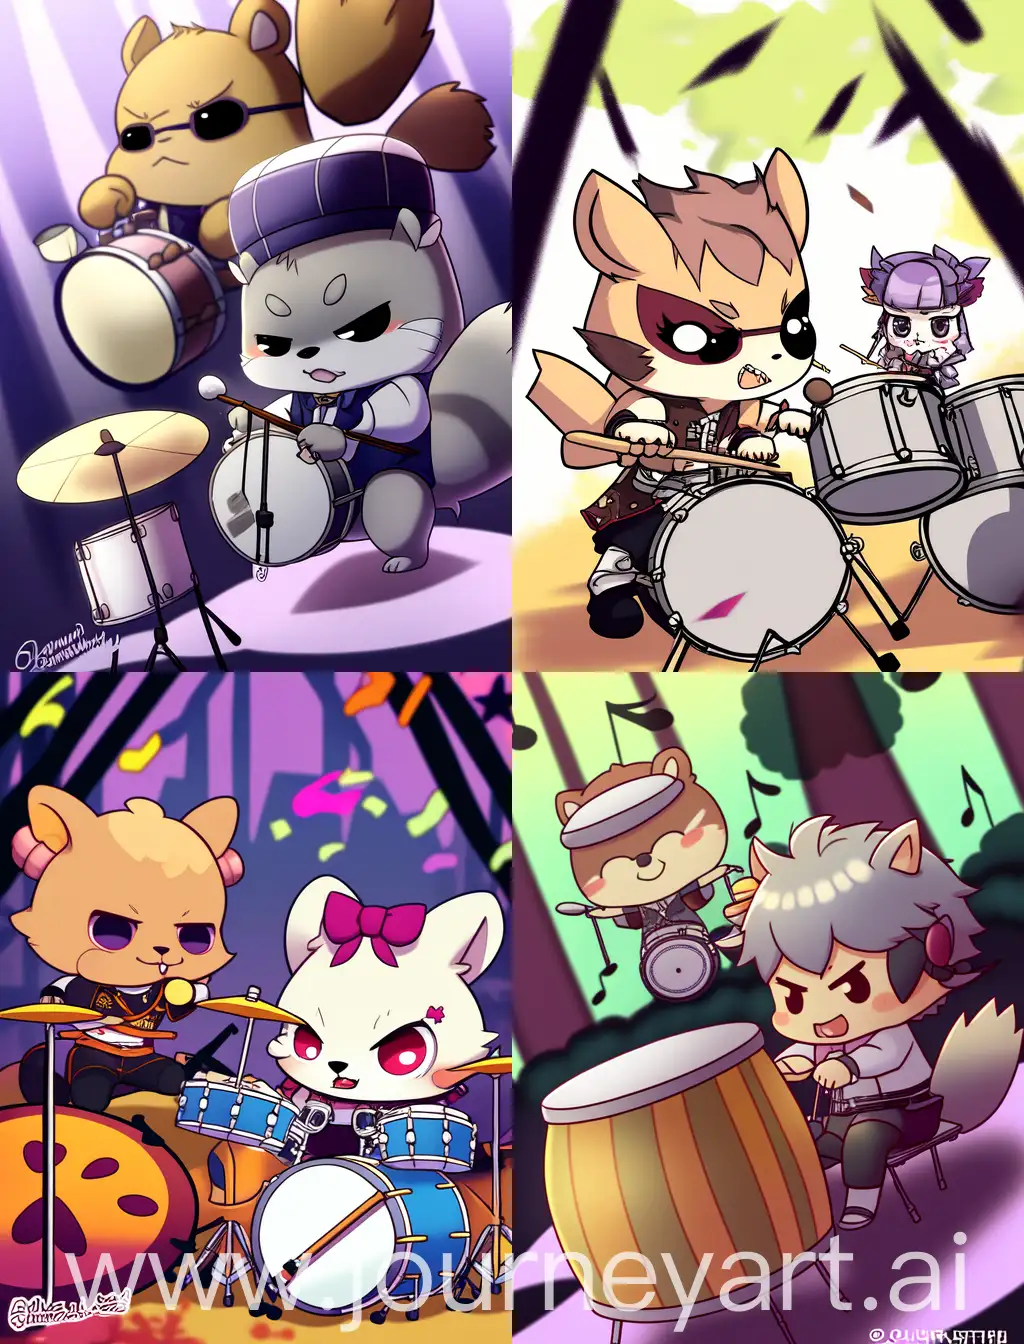 chibi squirrel and anime guy playing drums, with spooky background, 